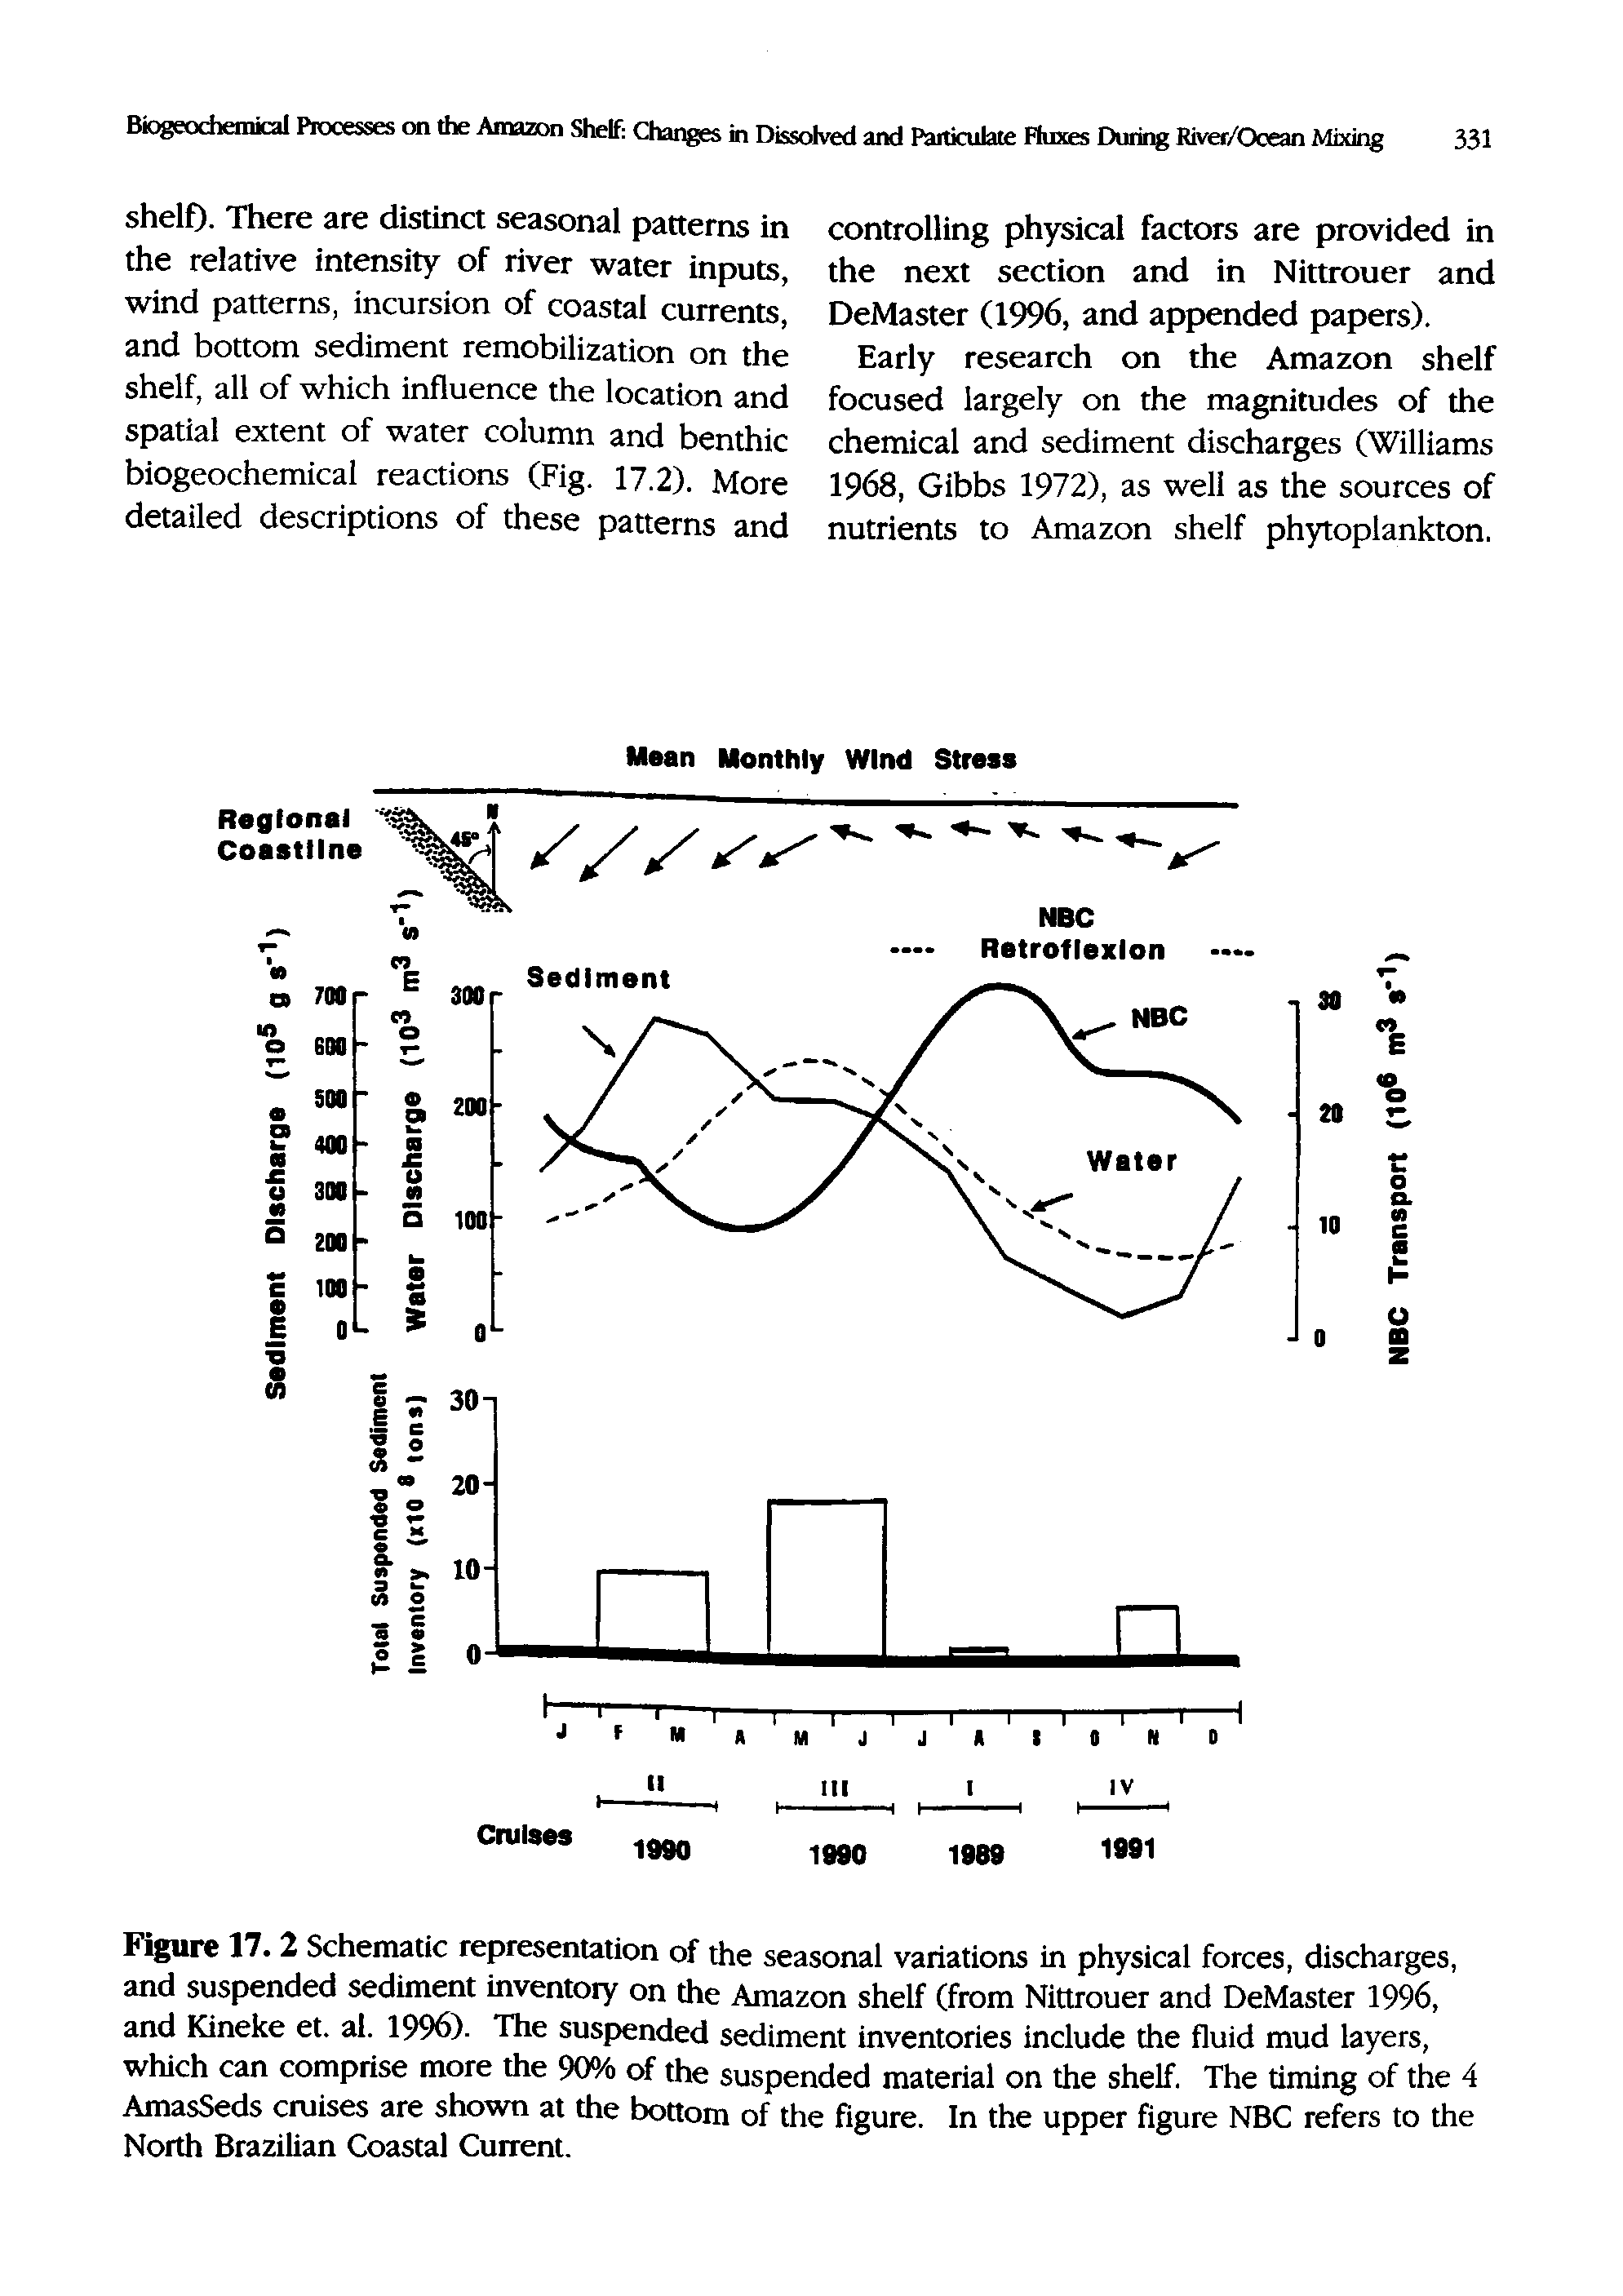 Figure 17. 2 Schematic representation of the seasonal variations in physical forces, discharges, and suspended sediment inventory on the Amazon shelf (from Nittrouer and DeMaster 1996, and Kineke et. al. 1996). The suspended sediment inventories include the fluid mud layers, which can comprise more the 90% of the suspended material on the shelf. The timing of the 4 AmasSeds cruises are shown at the bottom of the figure. In the upper figure NBC refers to the North Brazilian Coastal Current,...